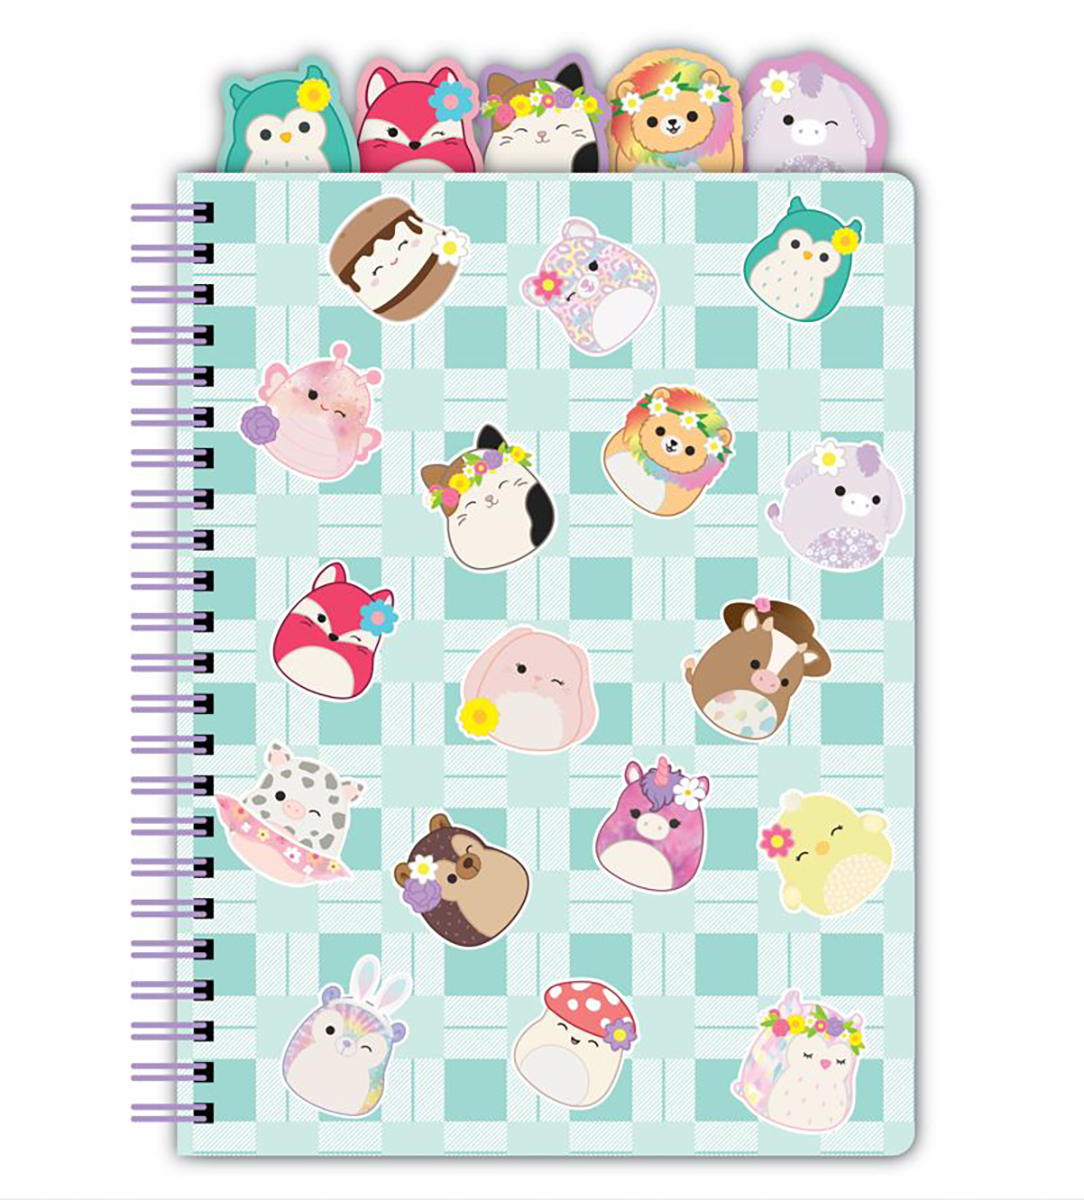  Squishmallows Tabbed Journal 